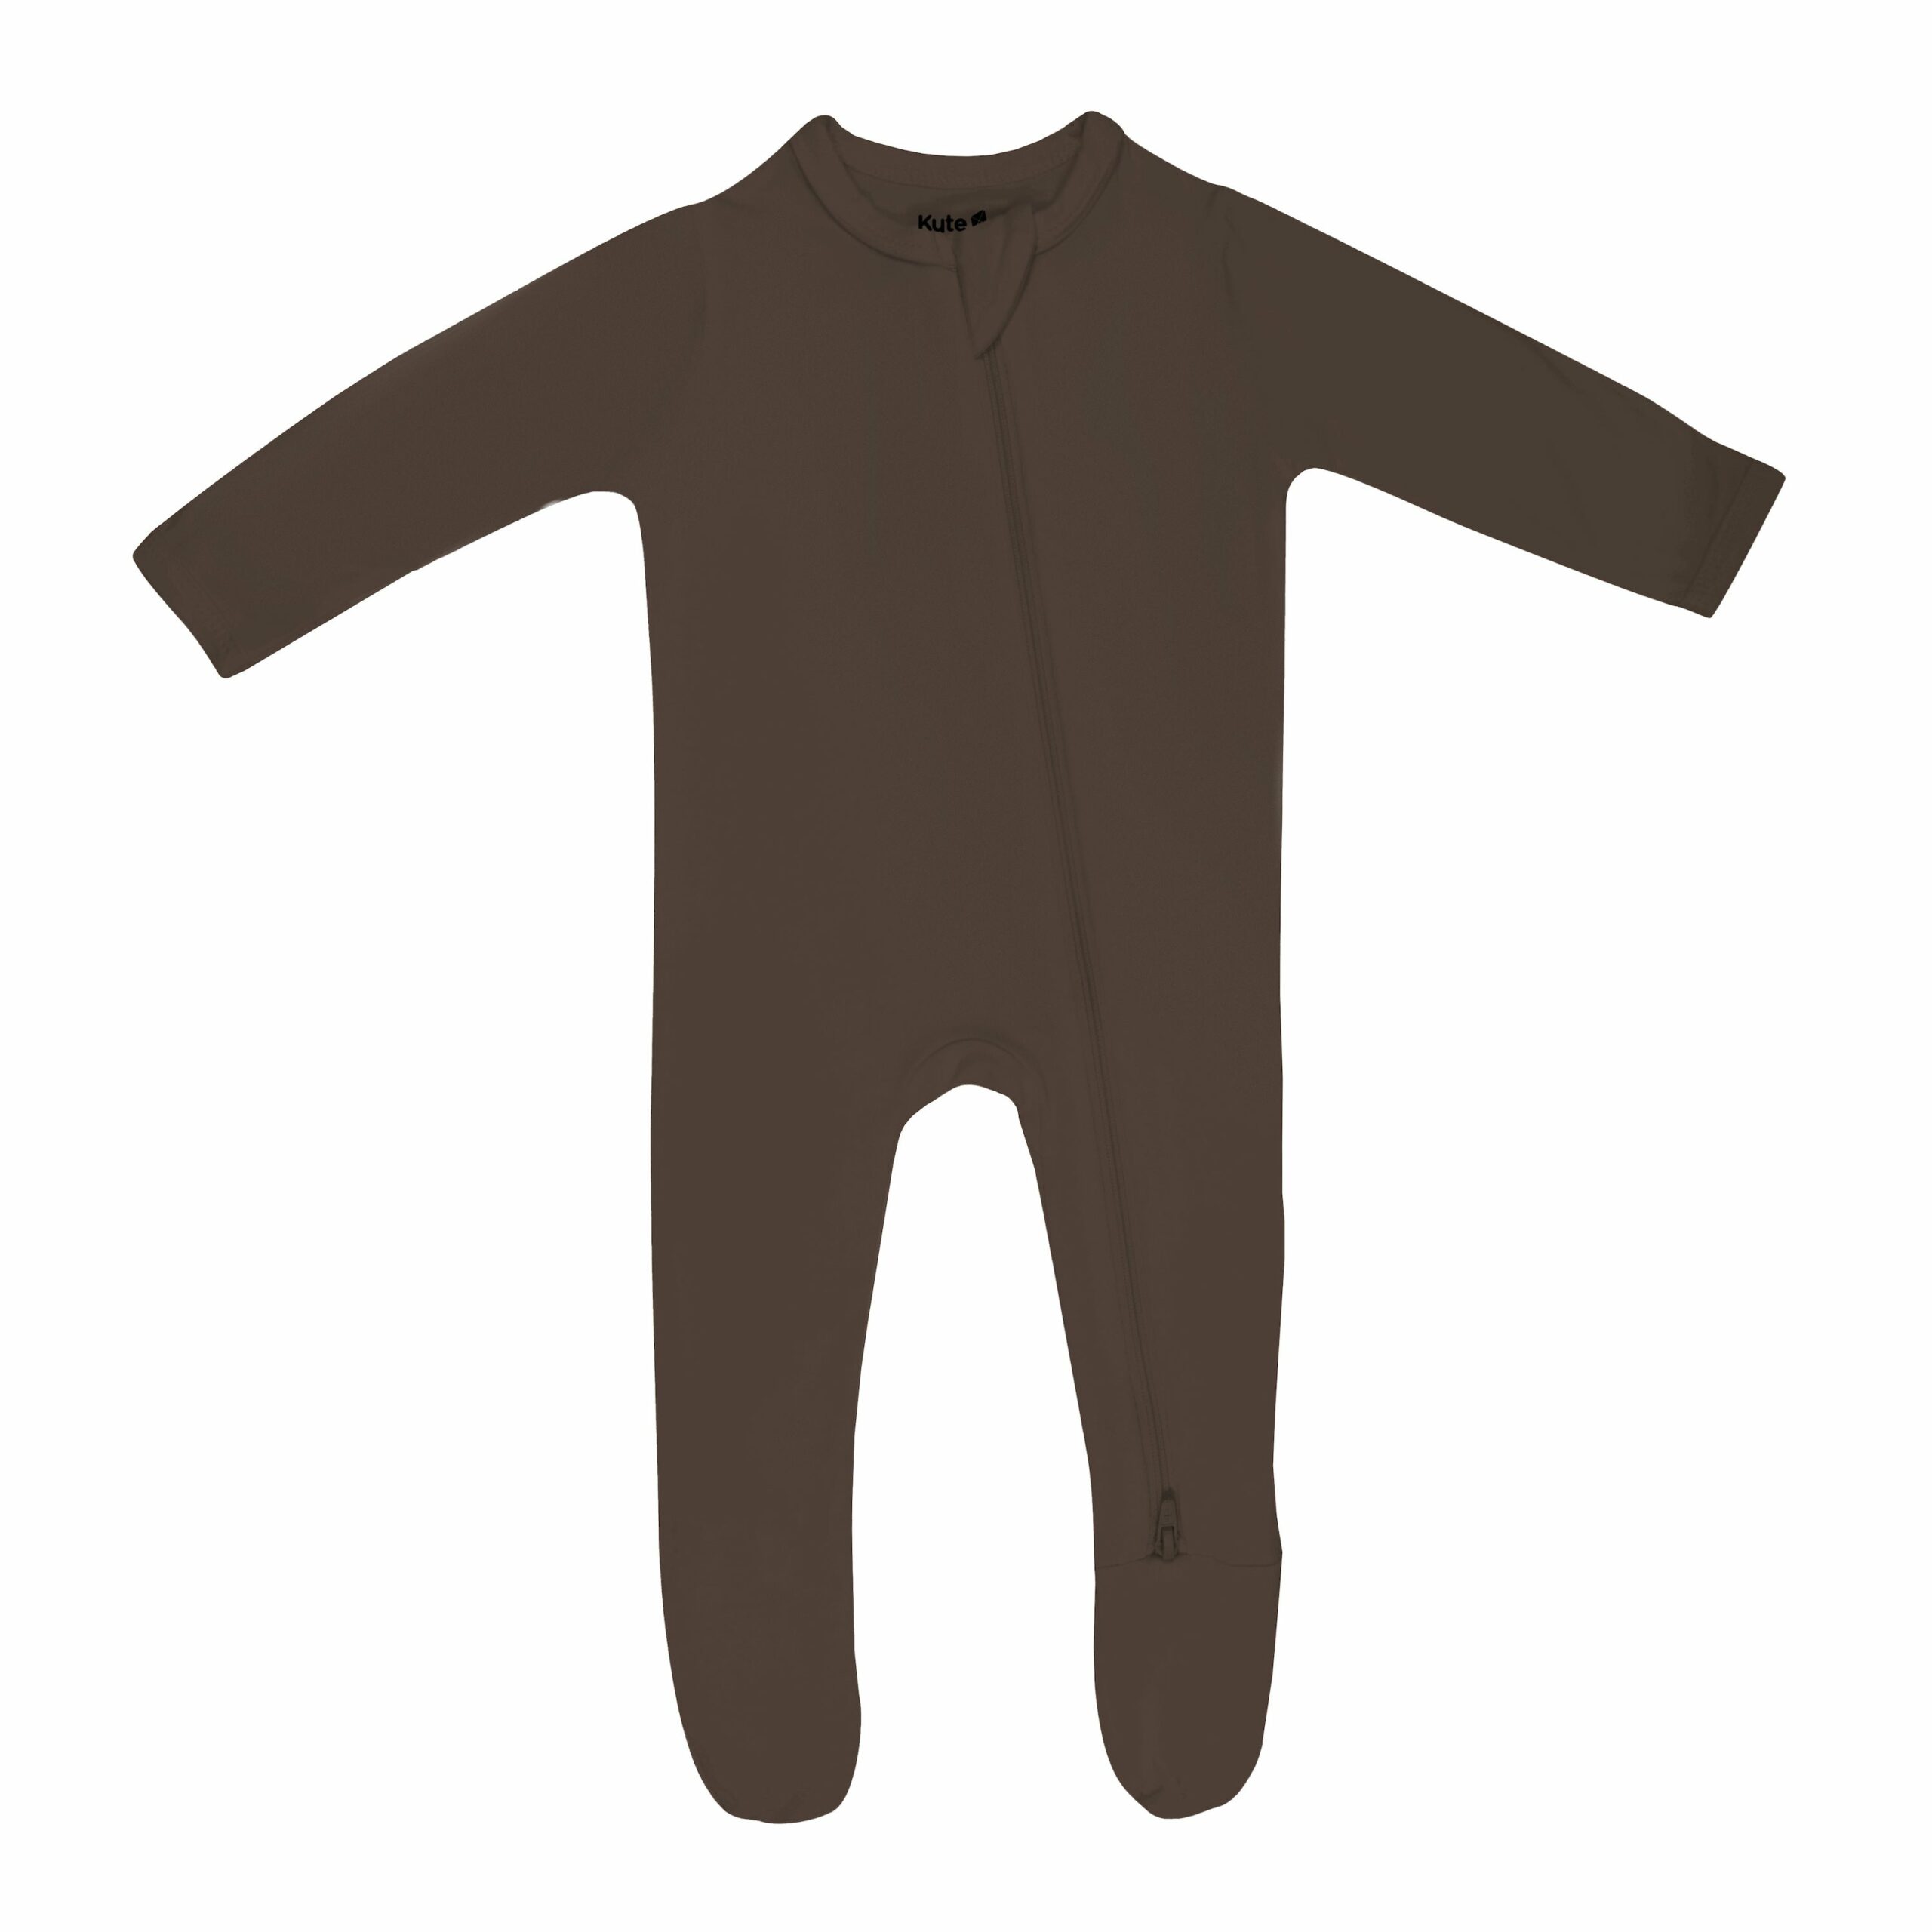 Zippered Footie in Espresso from Kyte BABY